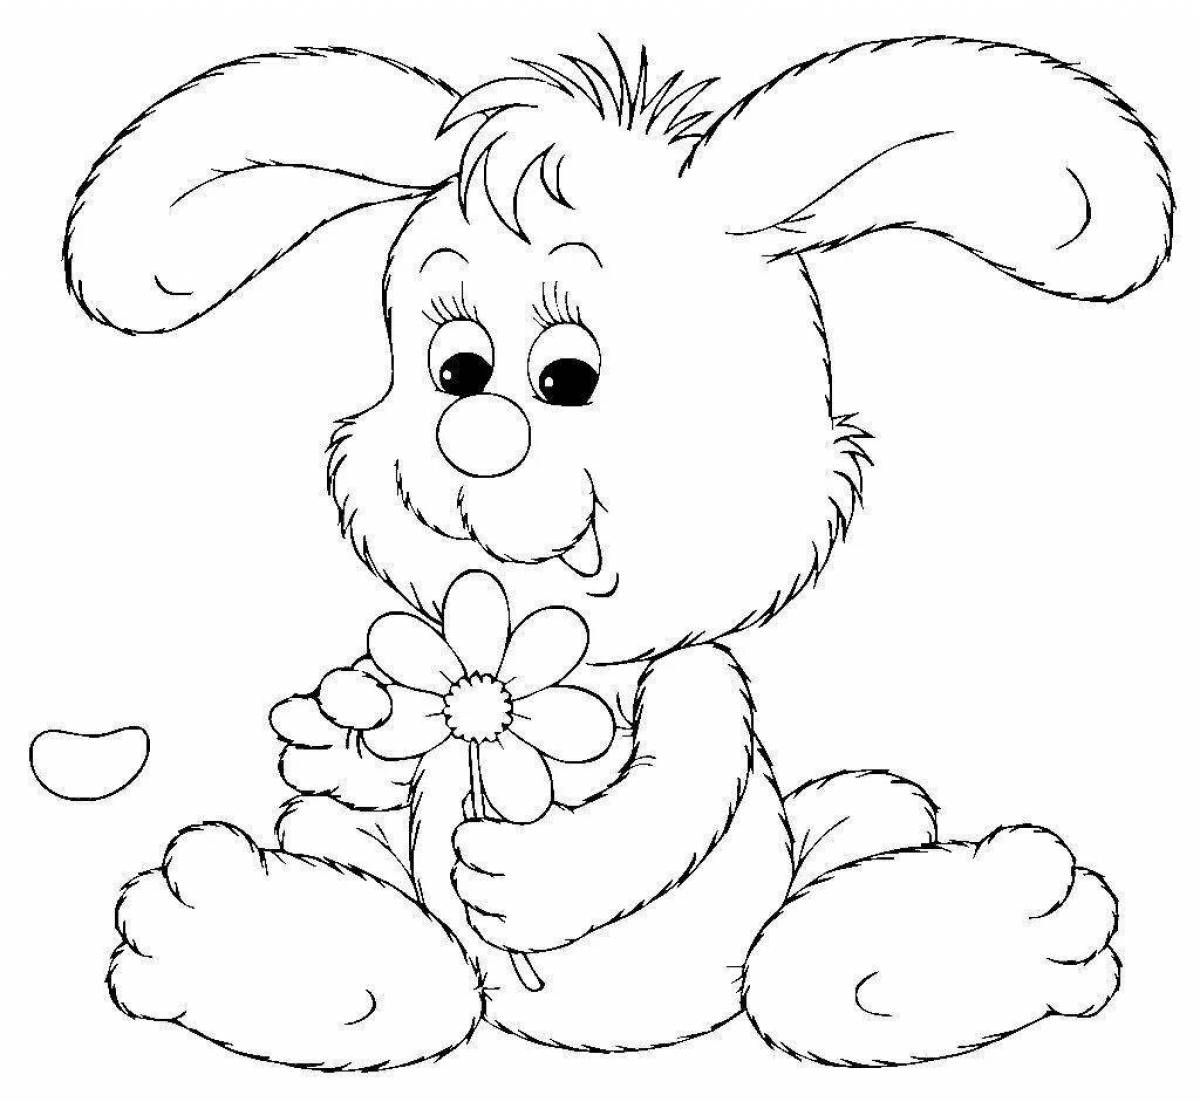 Coloring book fluffy long-haired rabbit